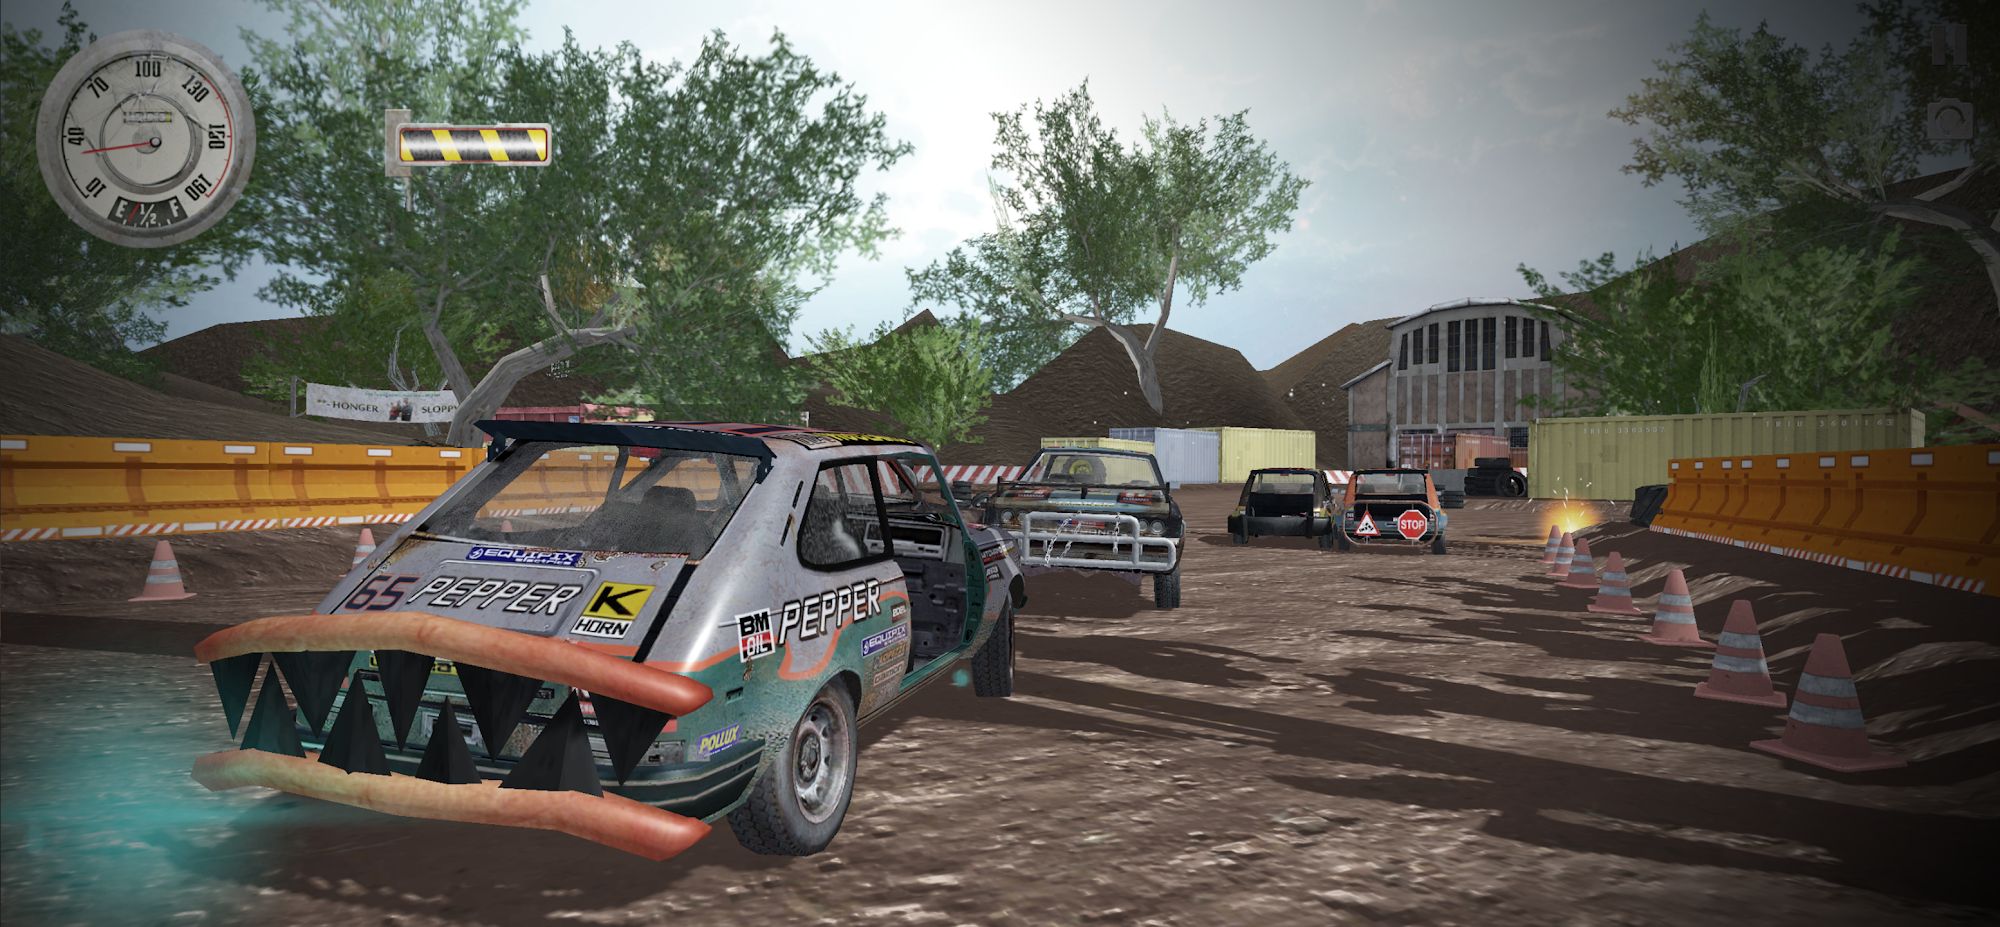 Derby Forever Online Wreck Cars Festival 2021 for Android